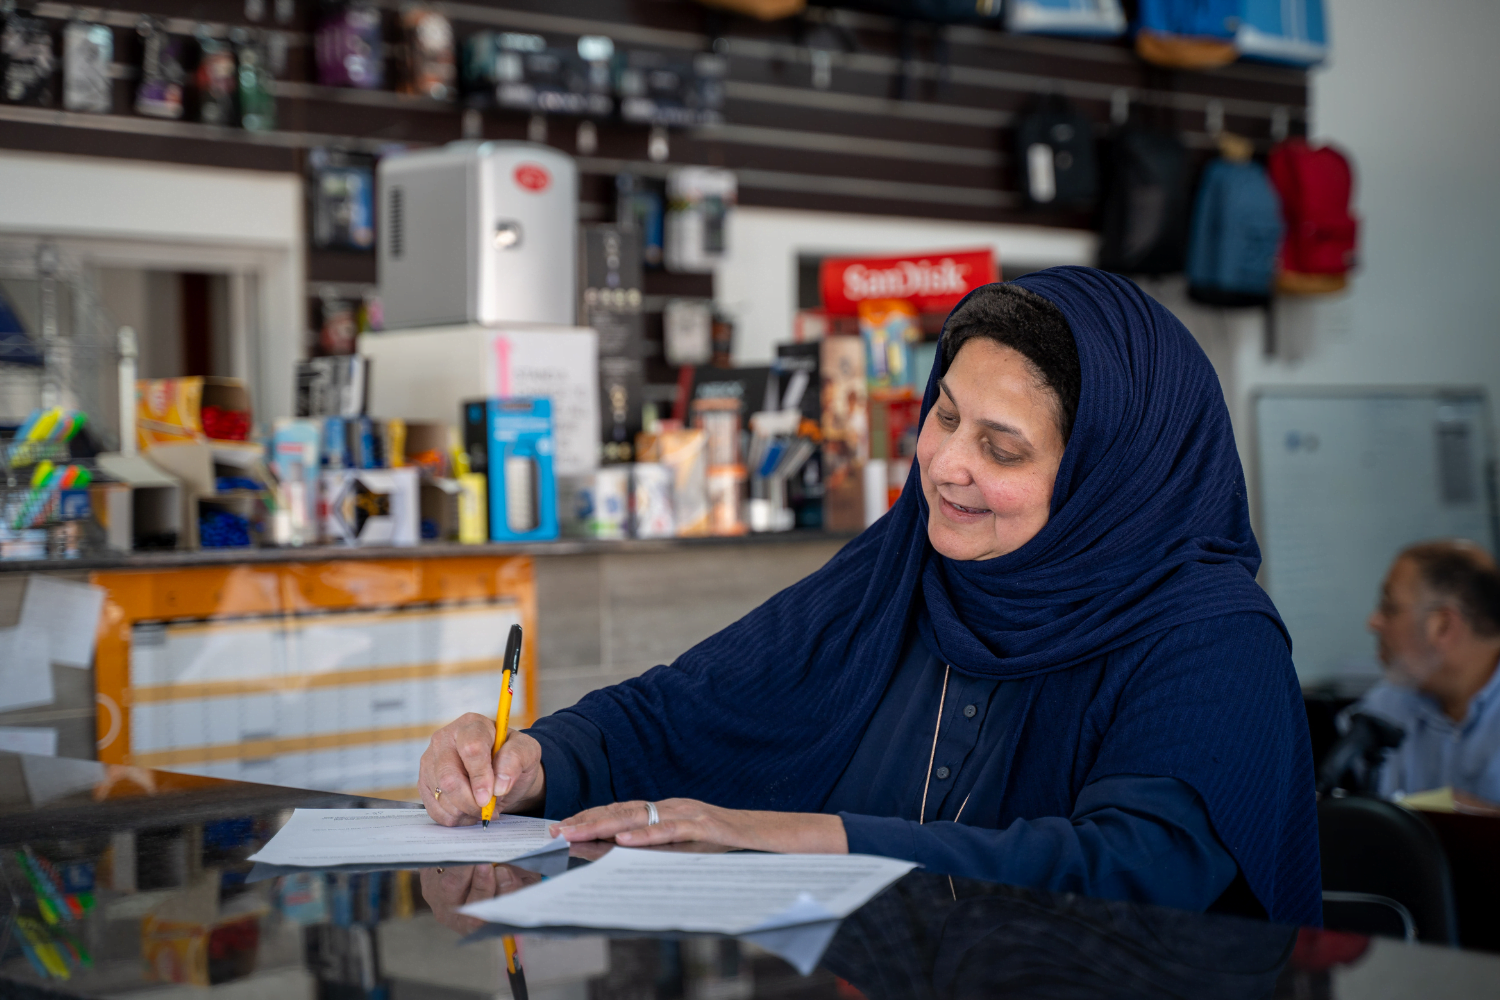 Shereen Cassim Hassim, a female entrepreneur, fills out a form at the reception area of her business.